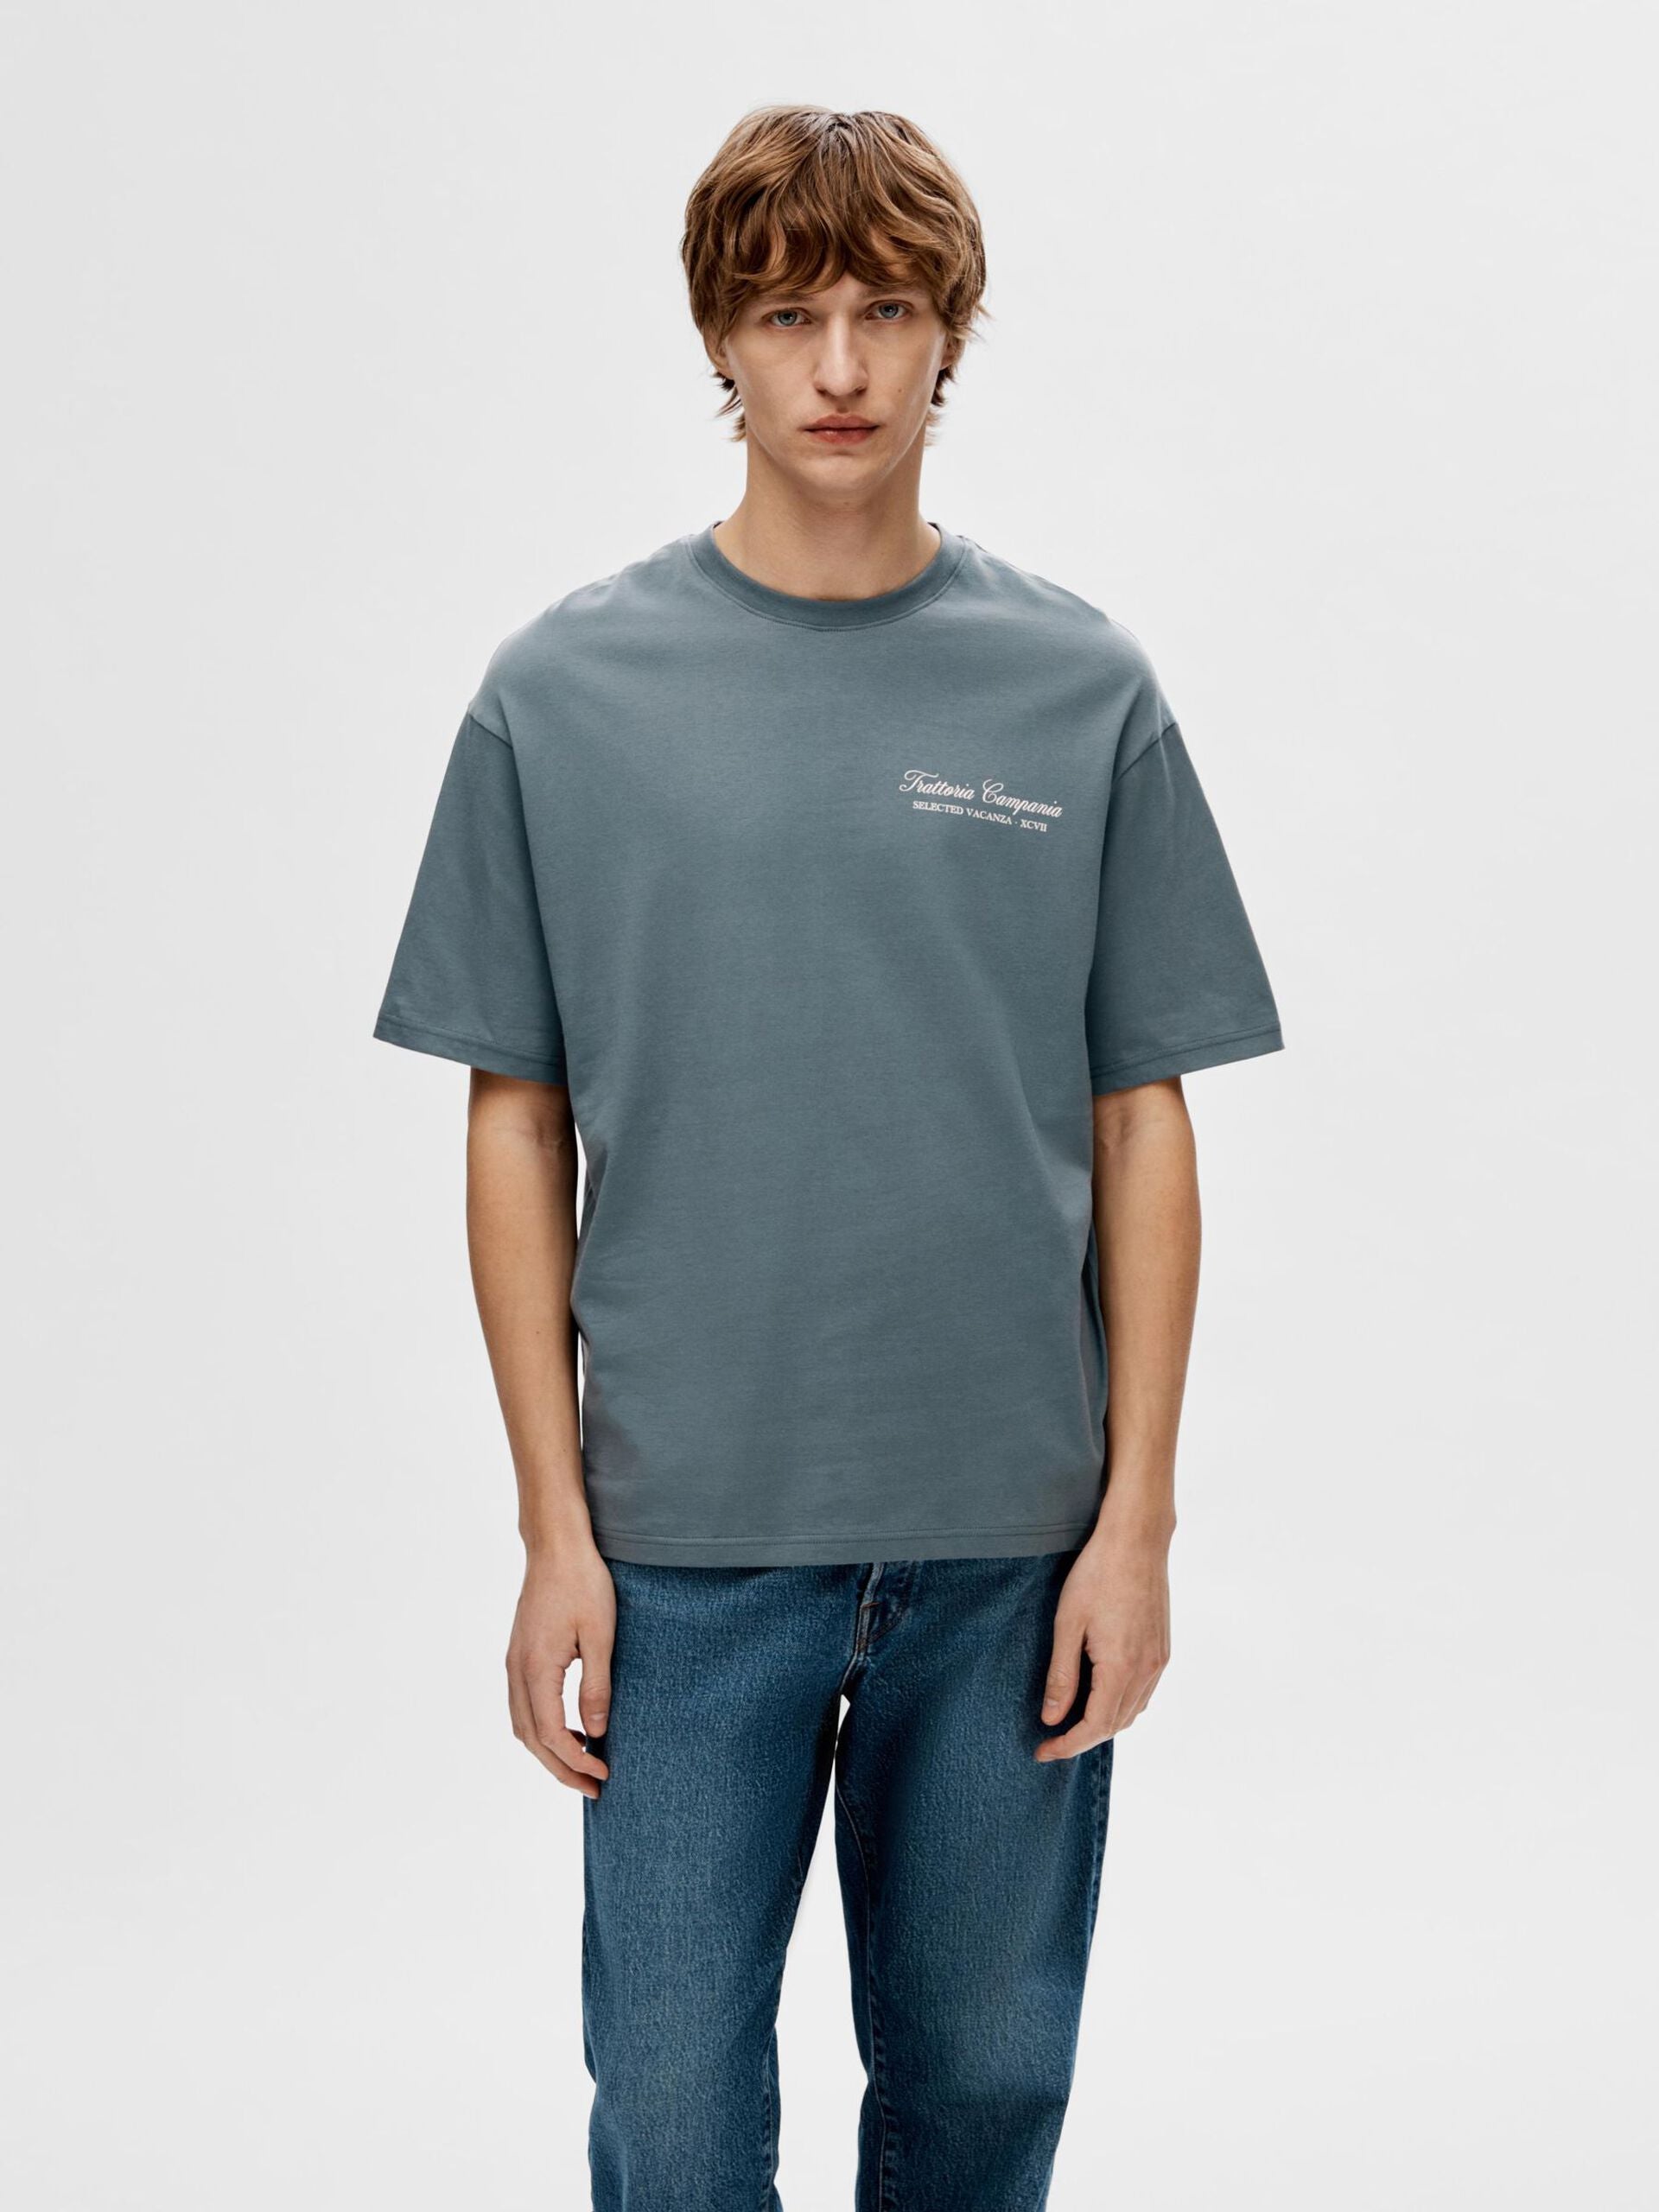 Selected Homme Gib T-Shirt , Stormy